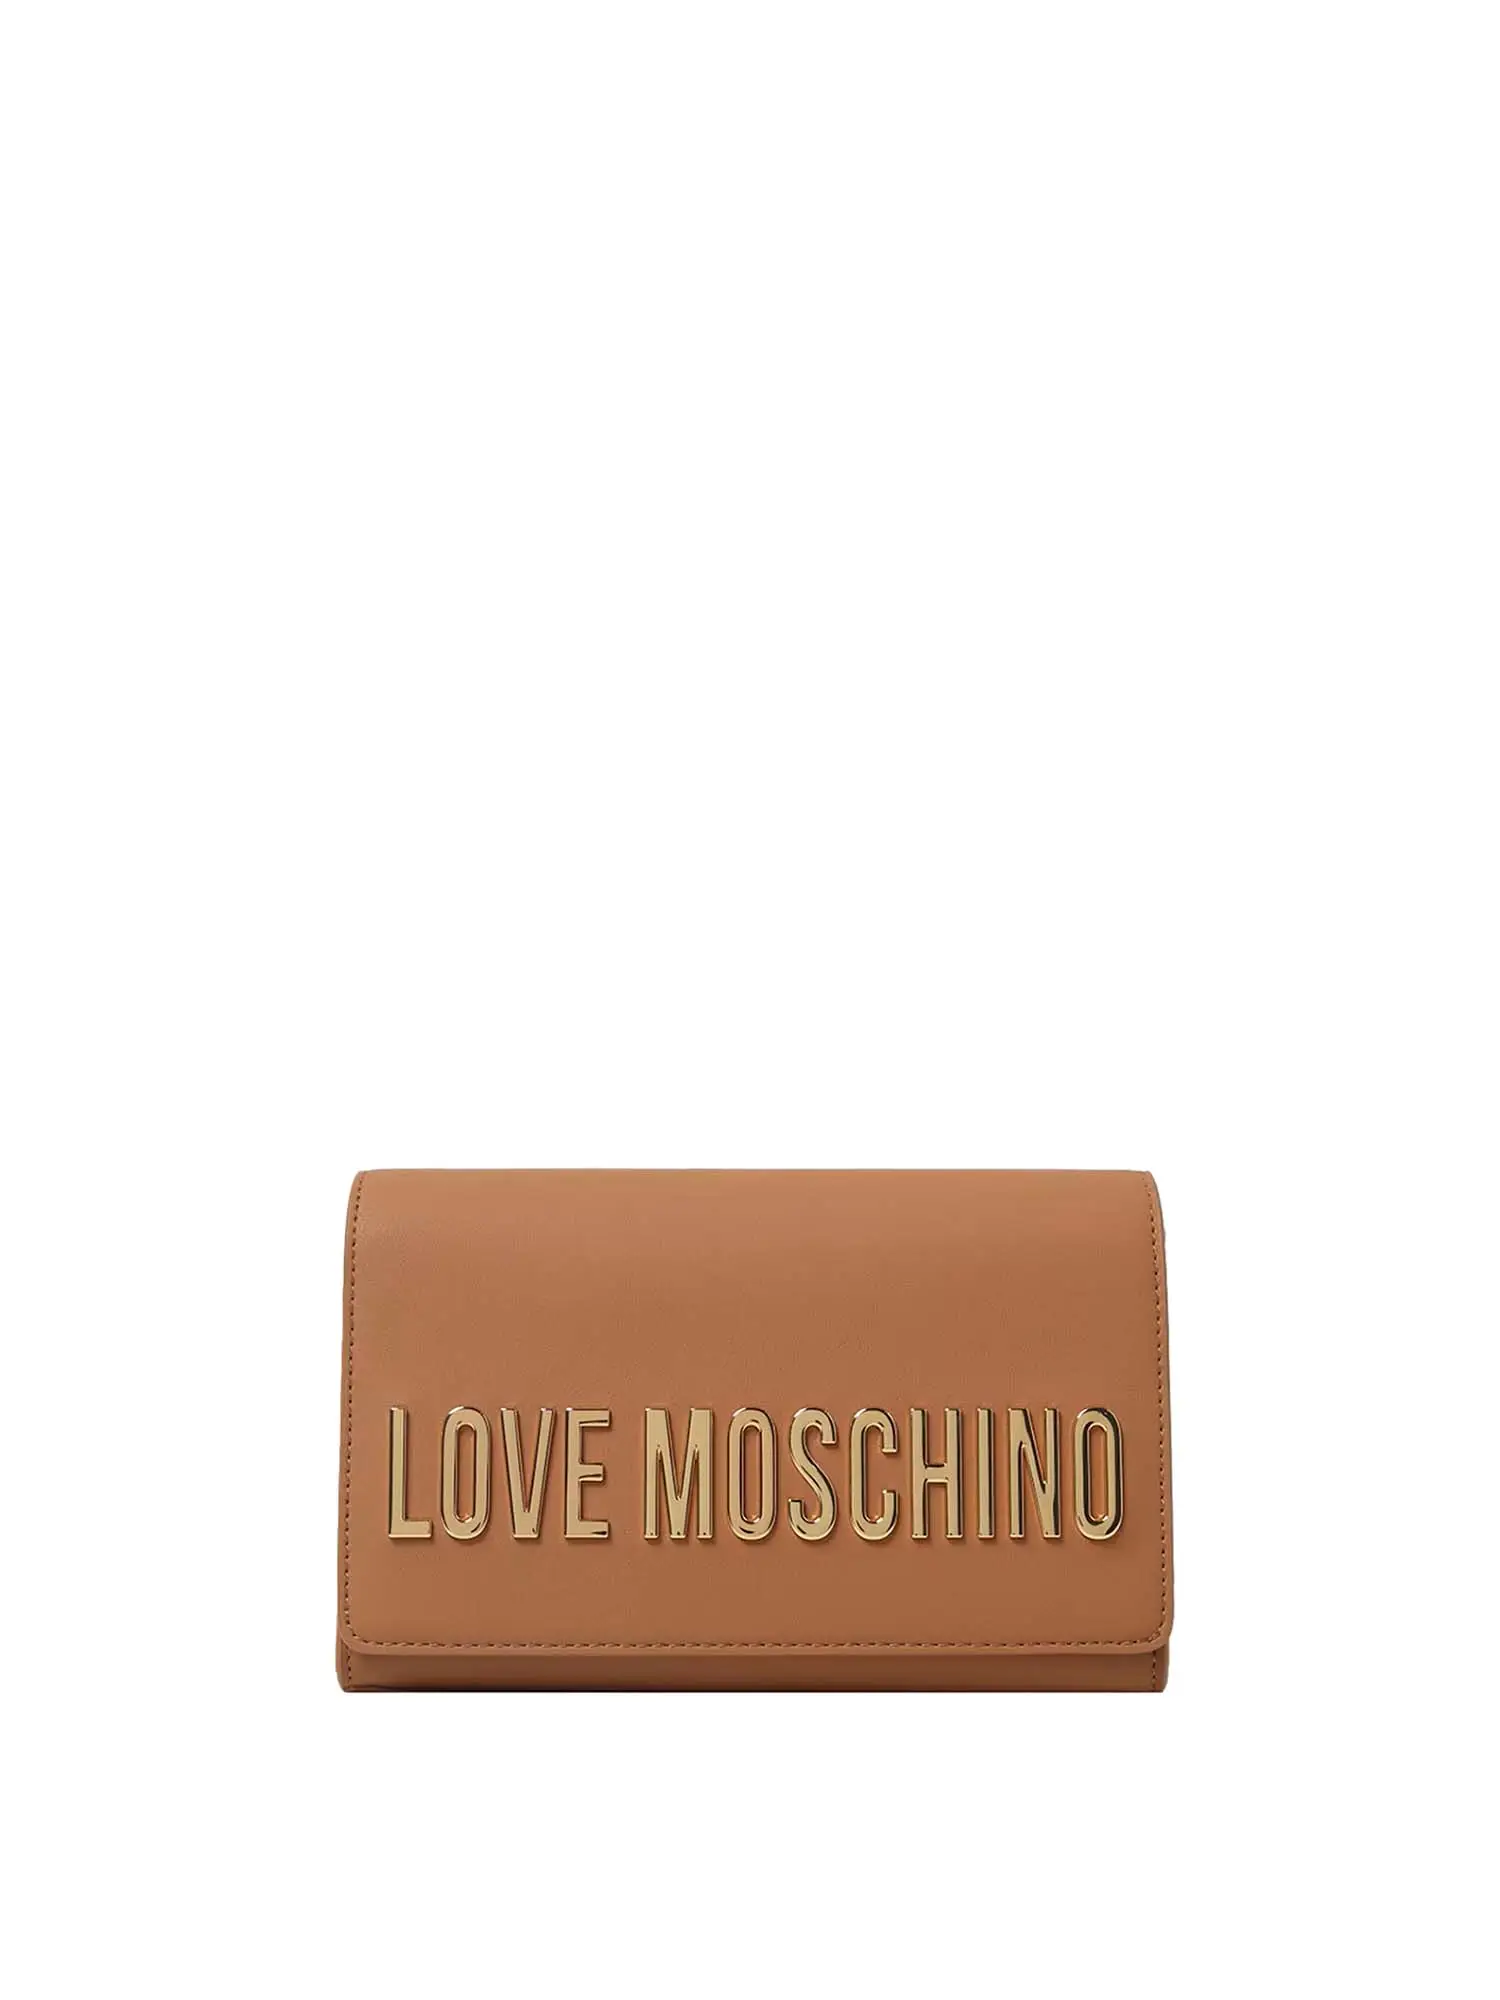 TRACOLLA DONNA - LOVE MOSCHINO - JC4103PP1IKD0 - CAMEL, UNICA